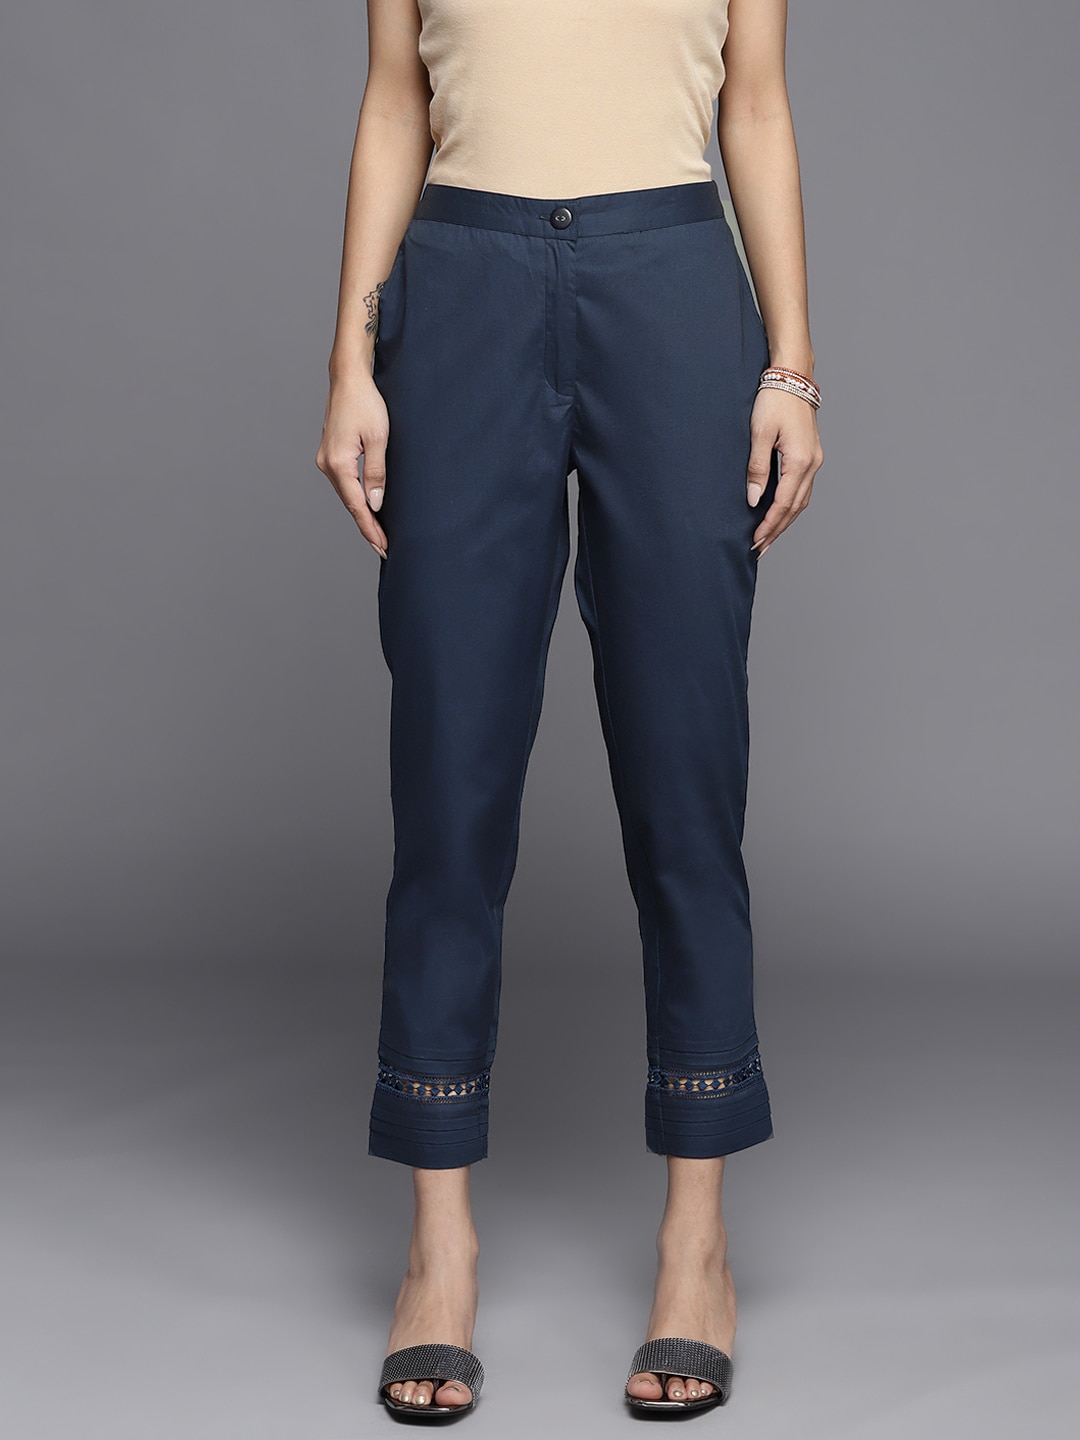 Libas Women Navy Blue Trousers Price in India